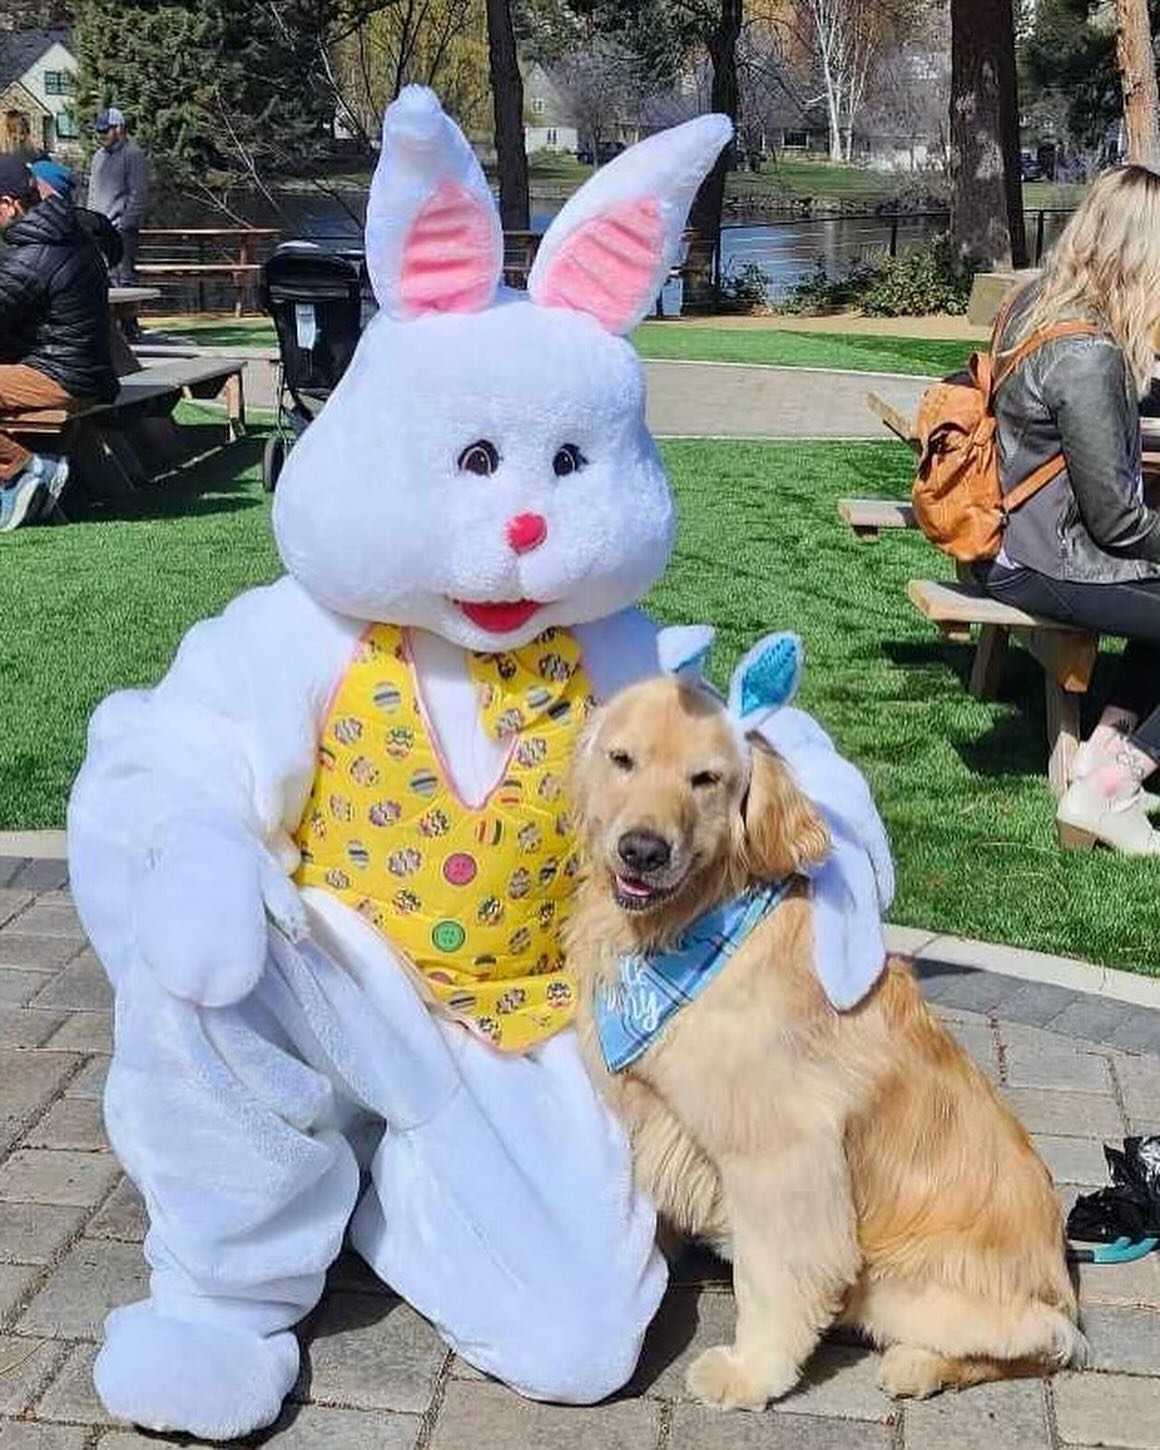 The Easter Bunny took over Downtown today! We had such a blast flowing in the Easter Bunny through the streets and scavenging for eggs at @bendbrewingco. It&rsquo;s not too late to head Downtown and enjoy this sunny Easter Eve. 
Big thanks to everyon